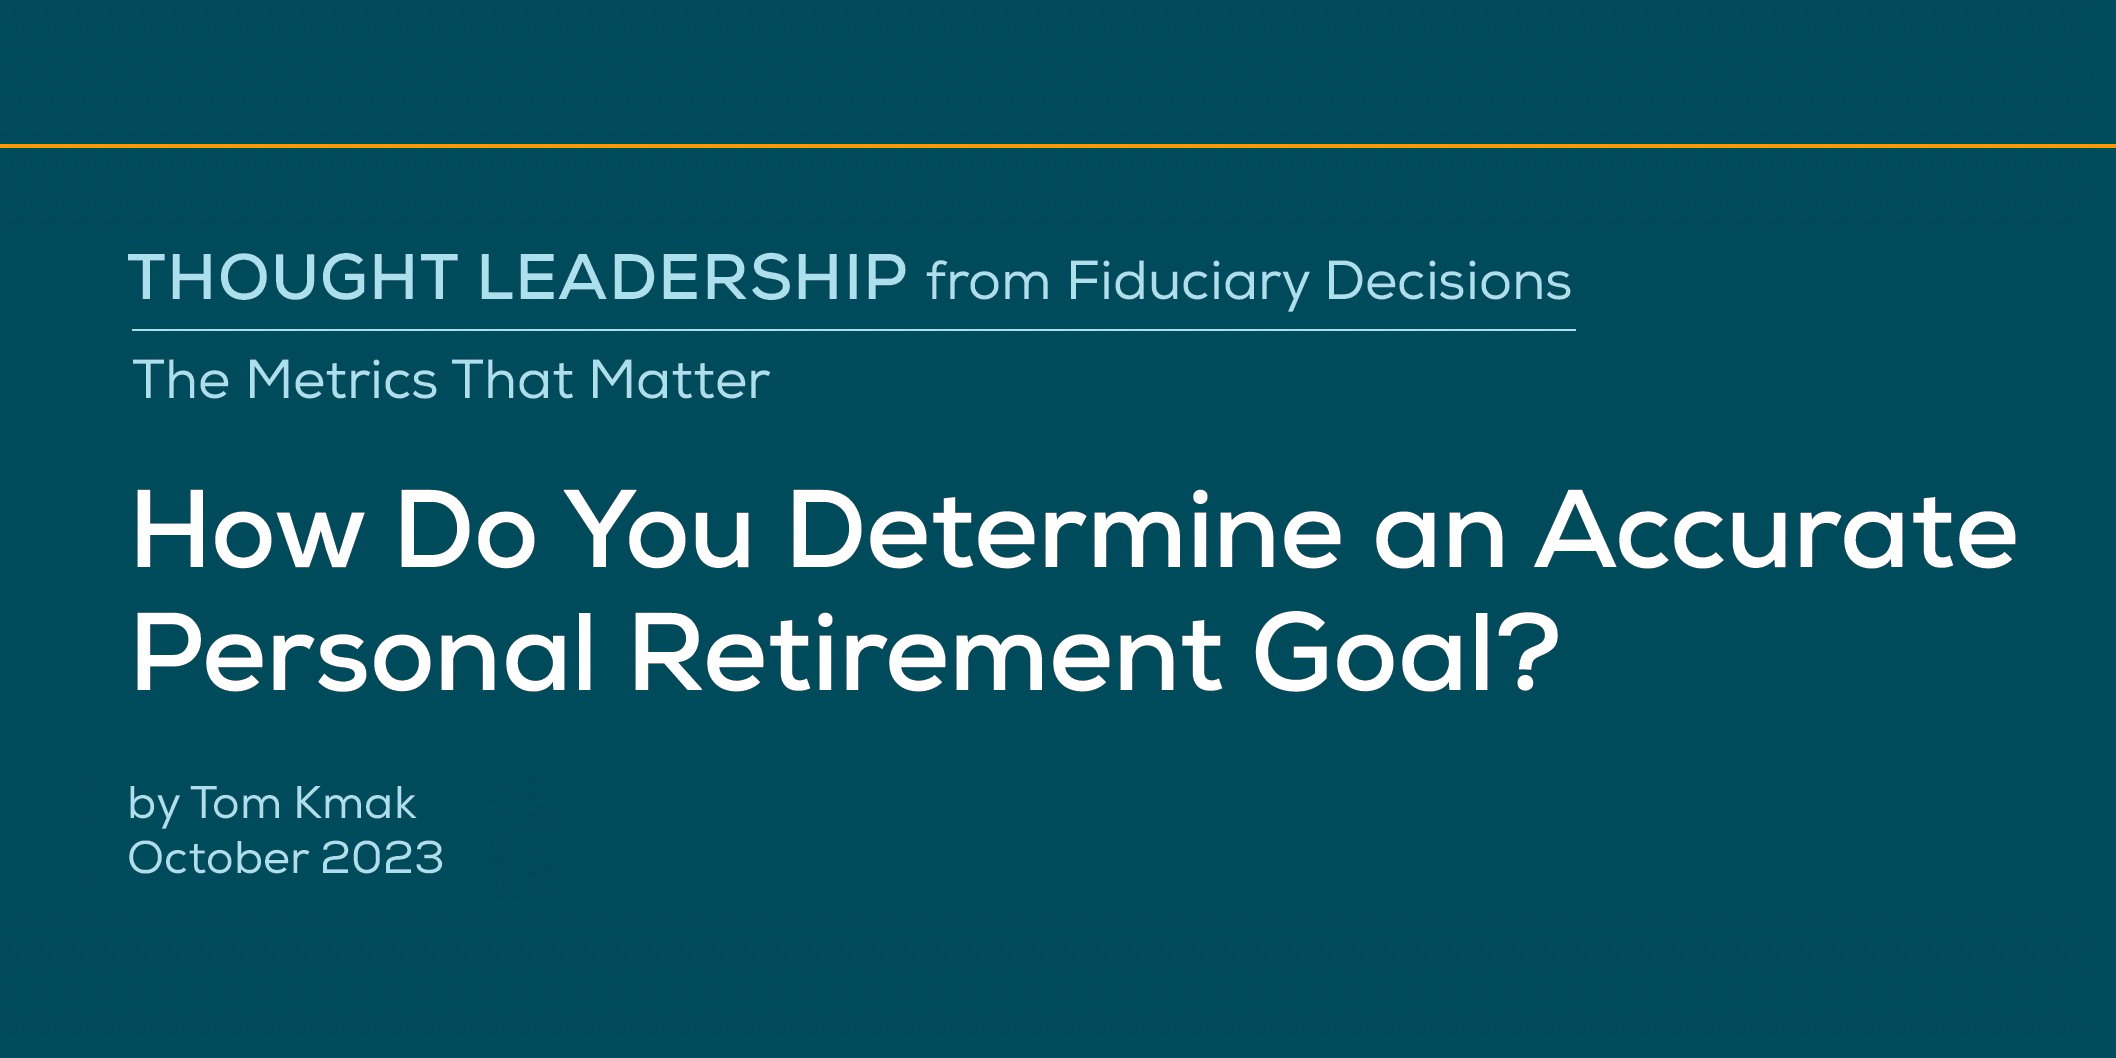 How Do You Determine an Accurate Personal Retirement Goal?